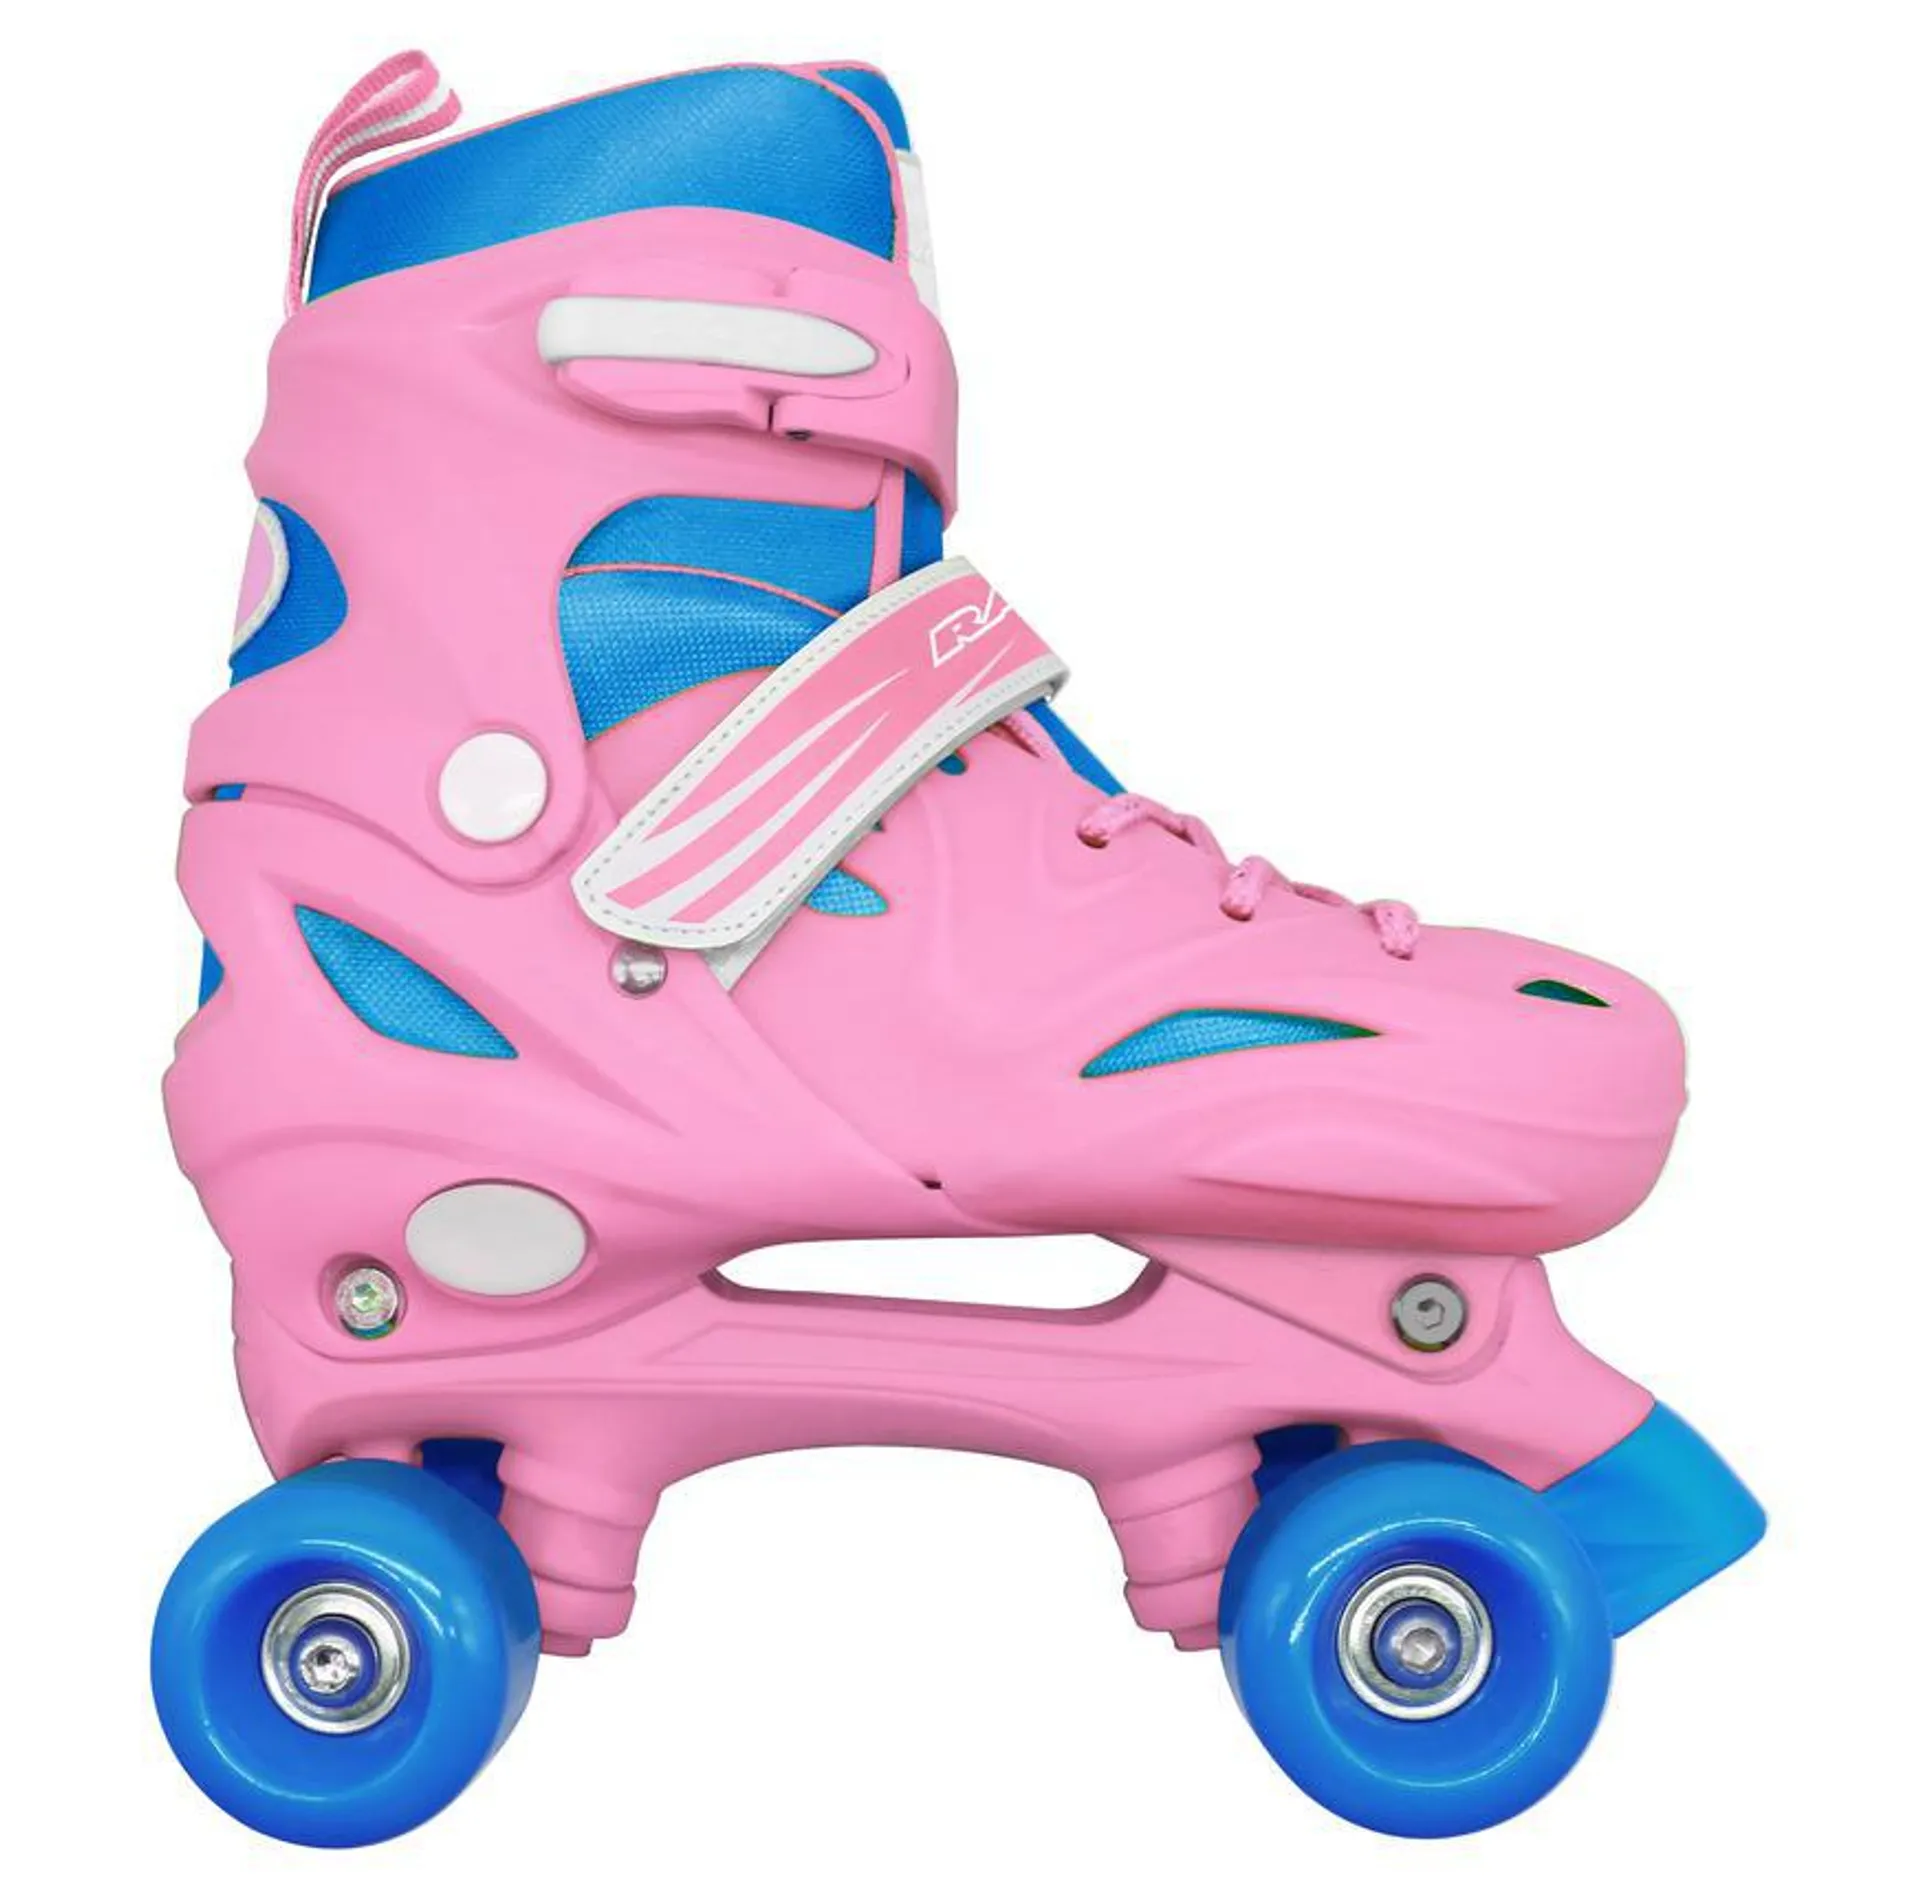 Patines Roller Turbo Rosa M